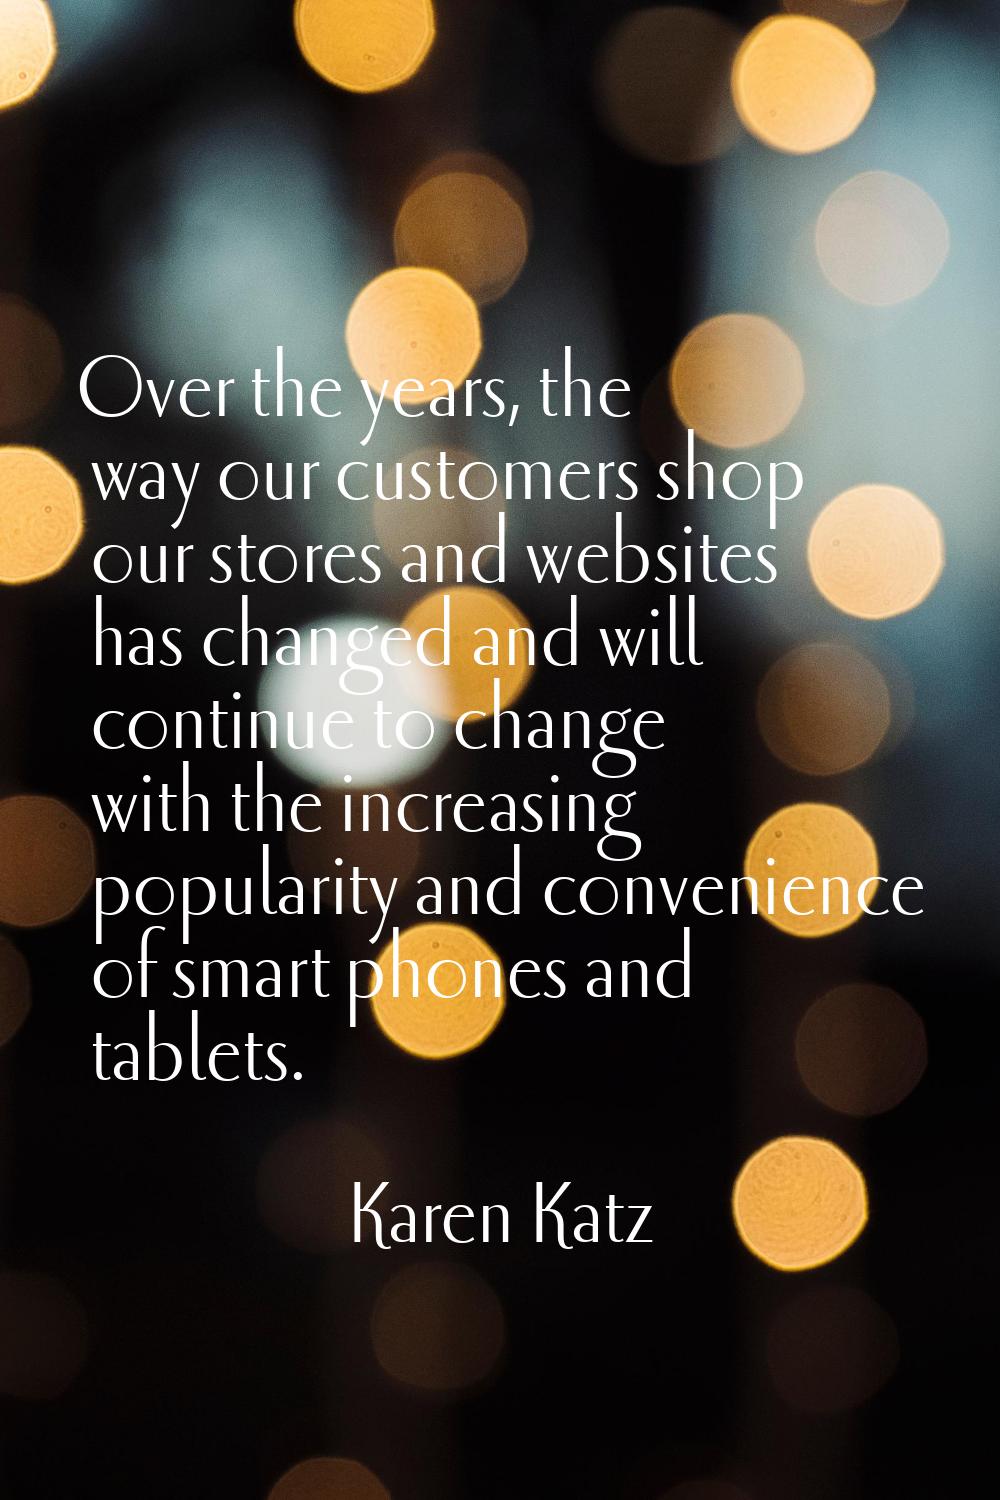 Over the years, the way our customers shop our stores and websites has changed and will continue to